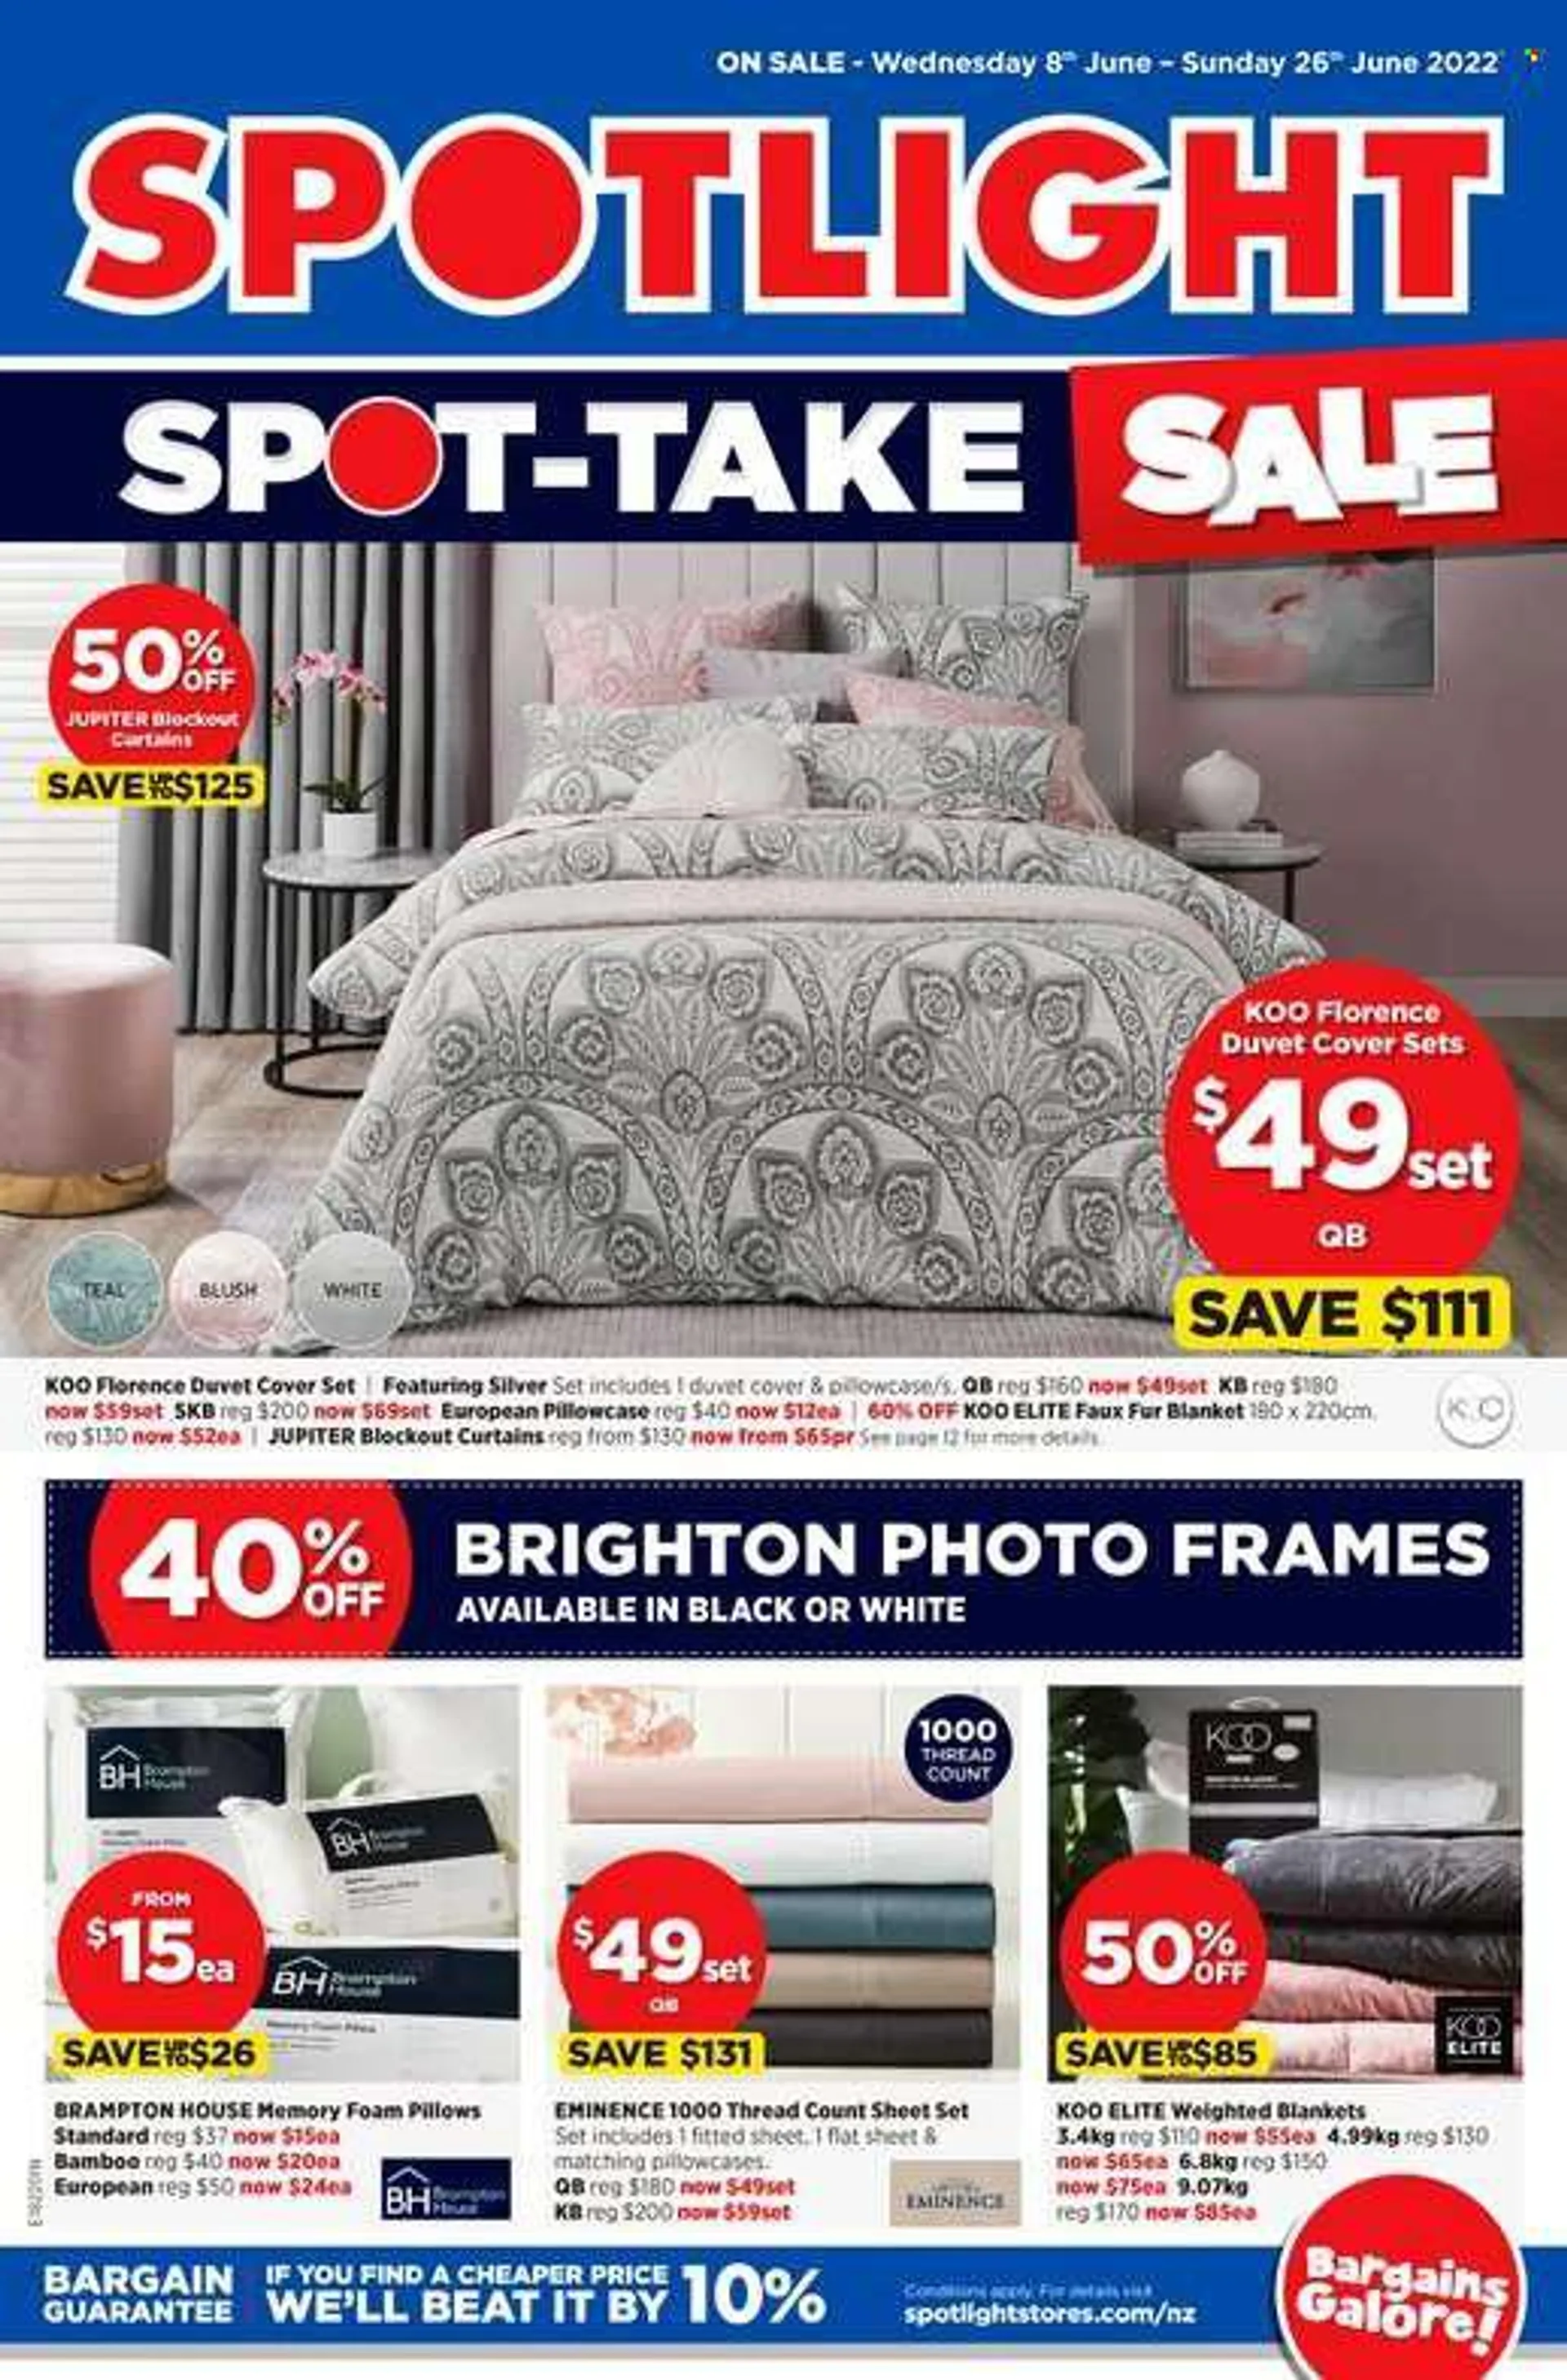 Spotlight mailer - 08.06.2022 - 26.06.2022 - Sales products - photo frame, blanket, duvet, pillow, pillowcases, foam pillow, curtains, quilt cover set. Page 1.